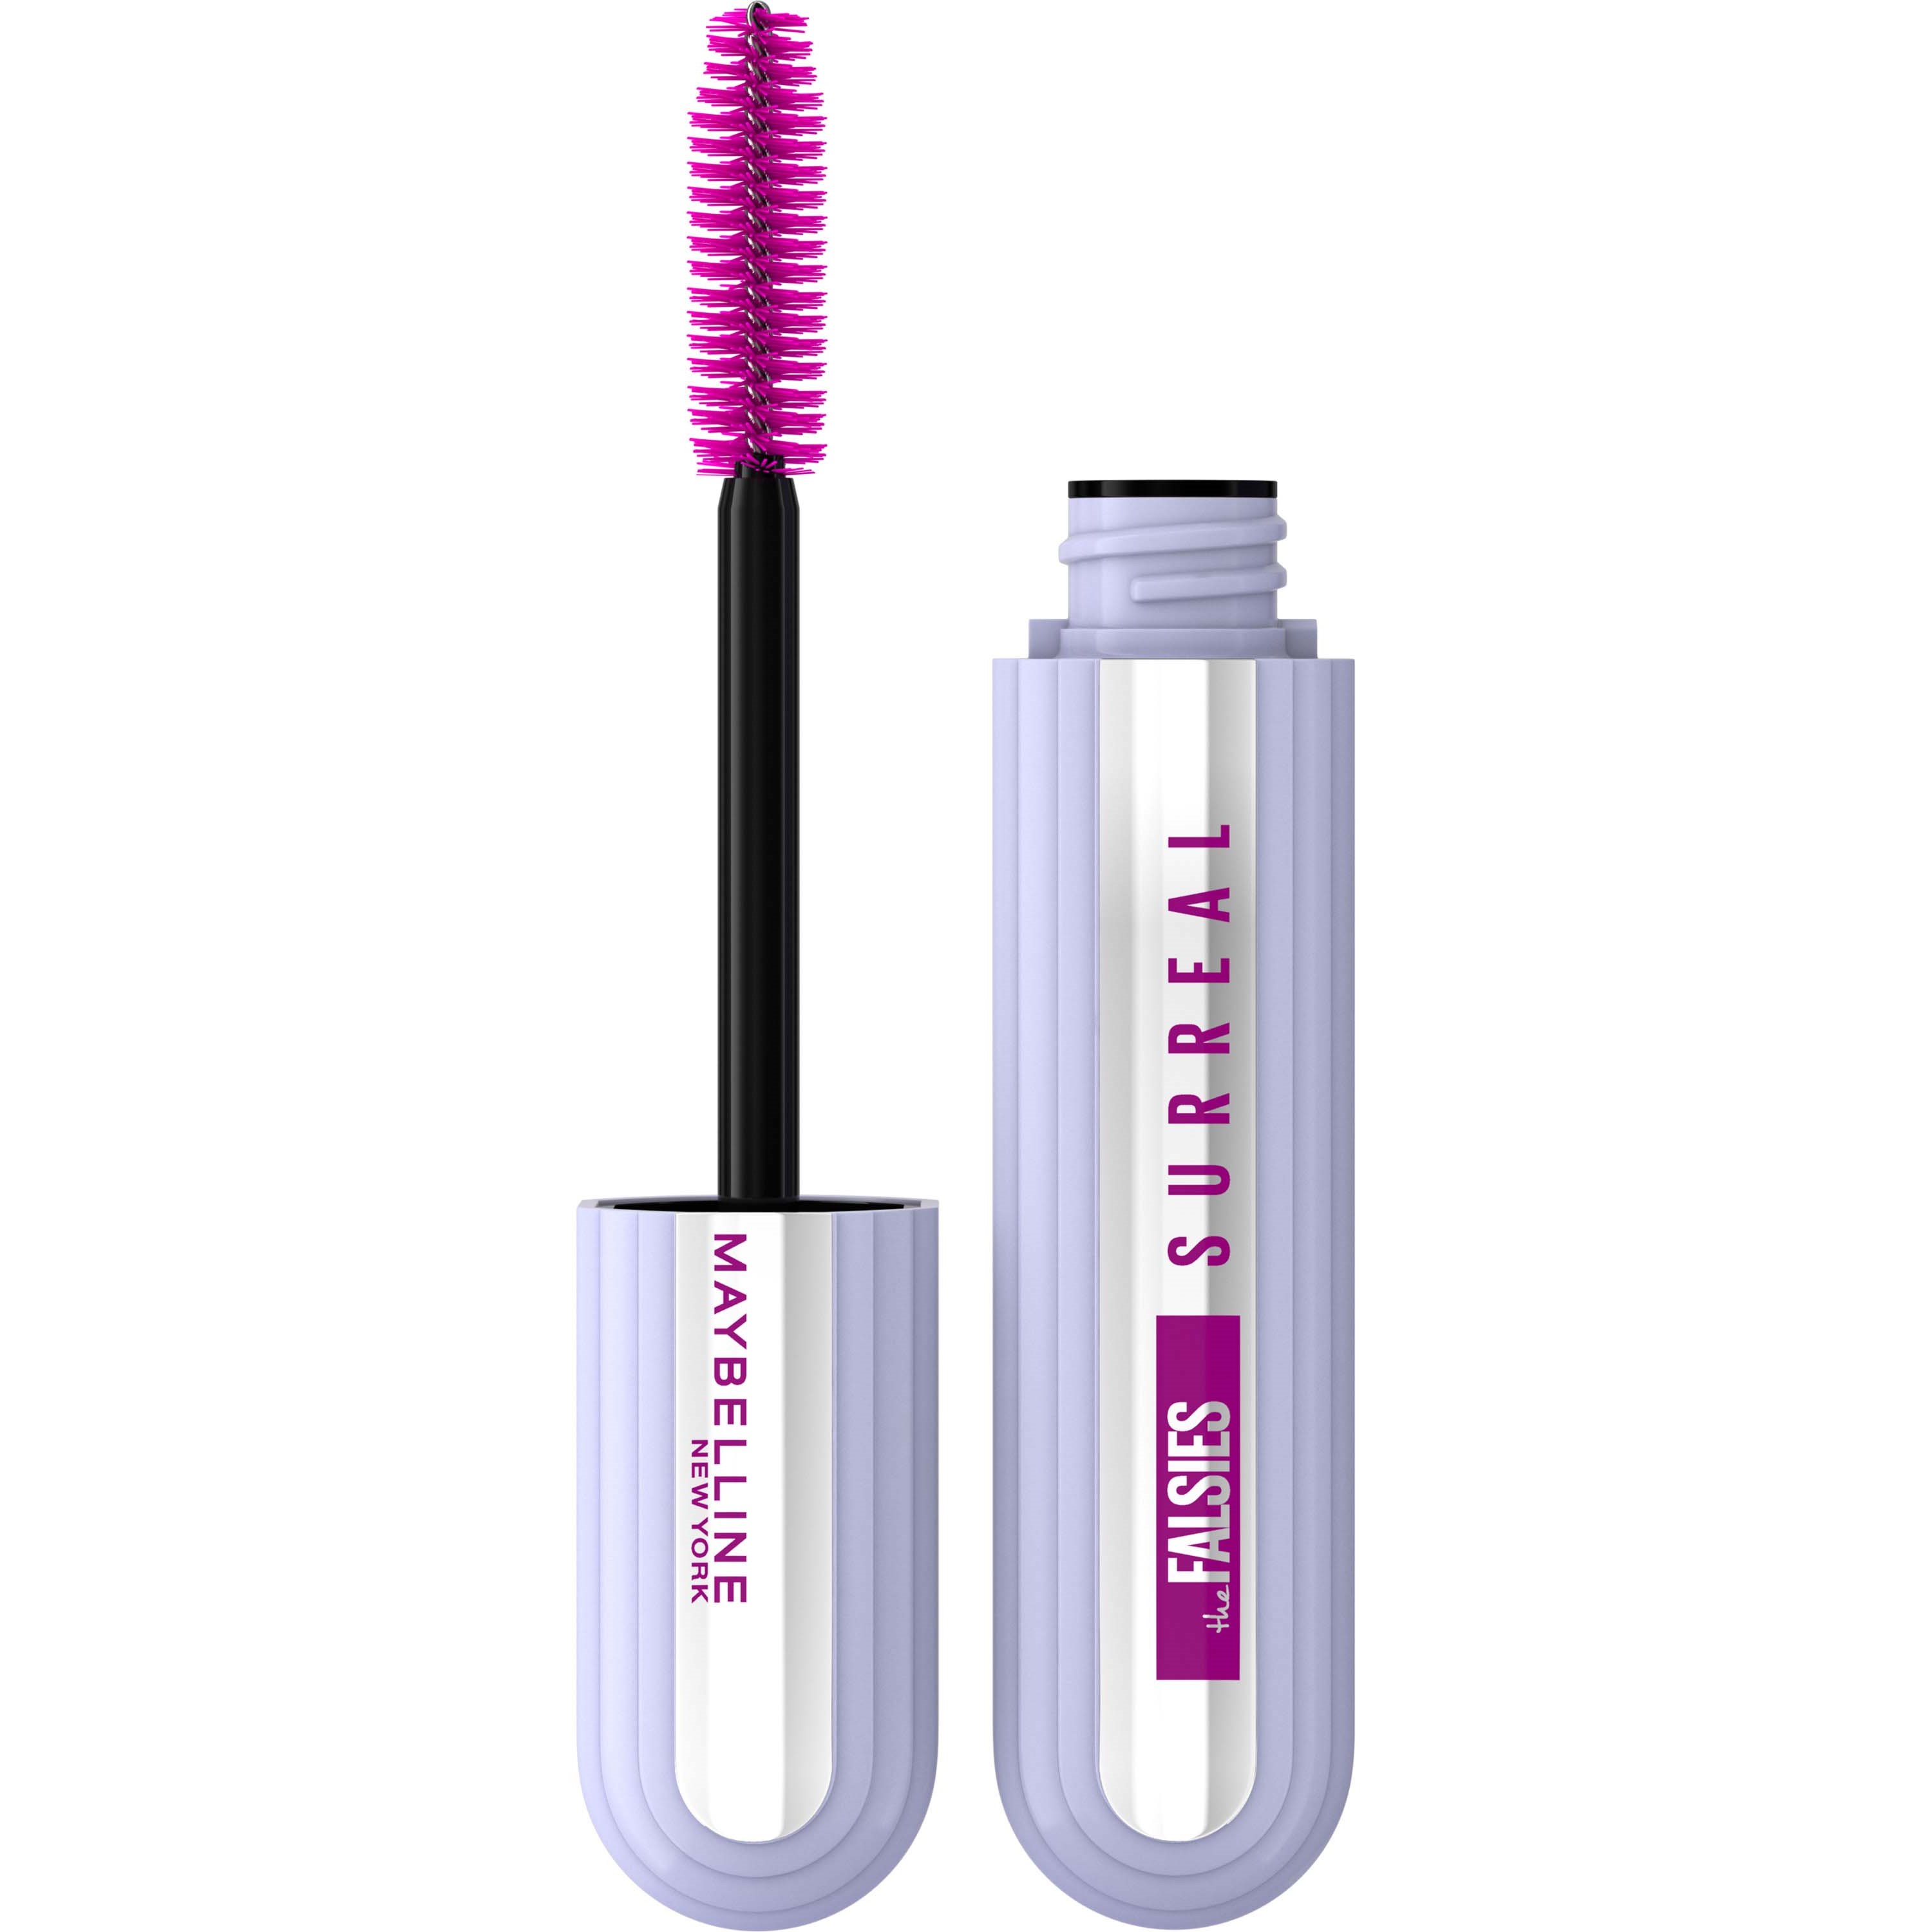 Maybelline New York The Falsies Surreal Extensions Mascara 1 Very blac